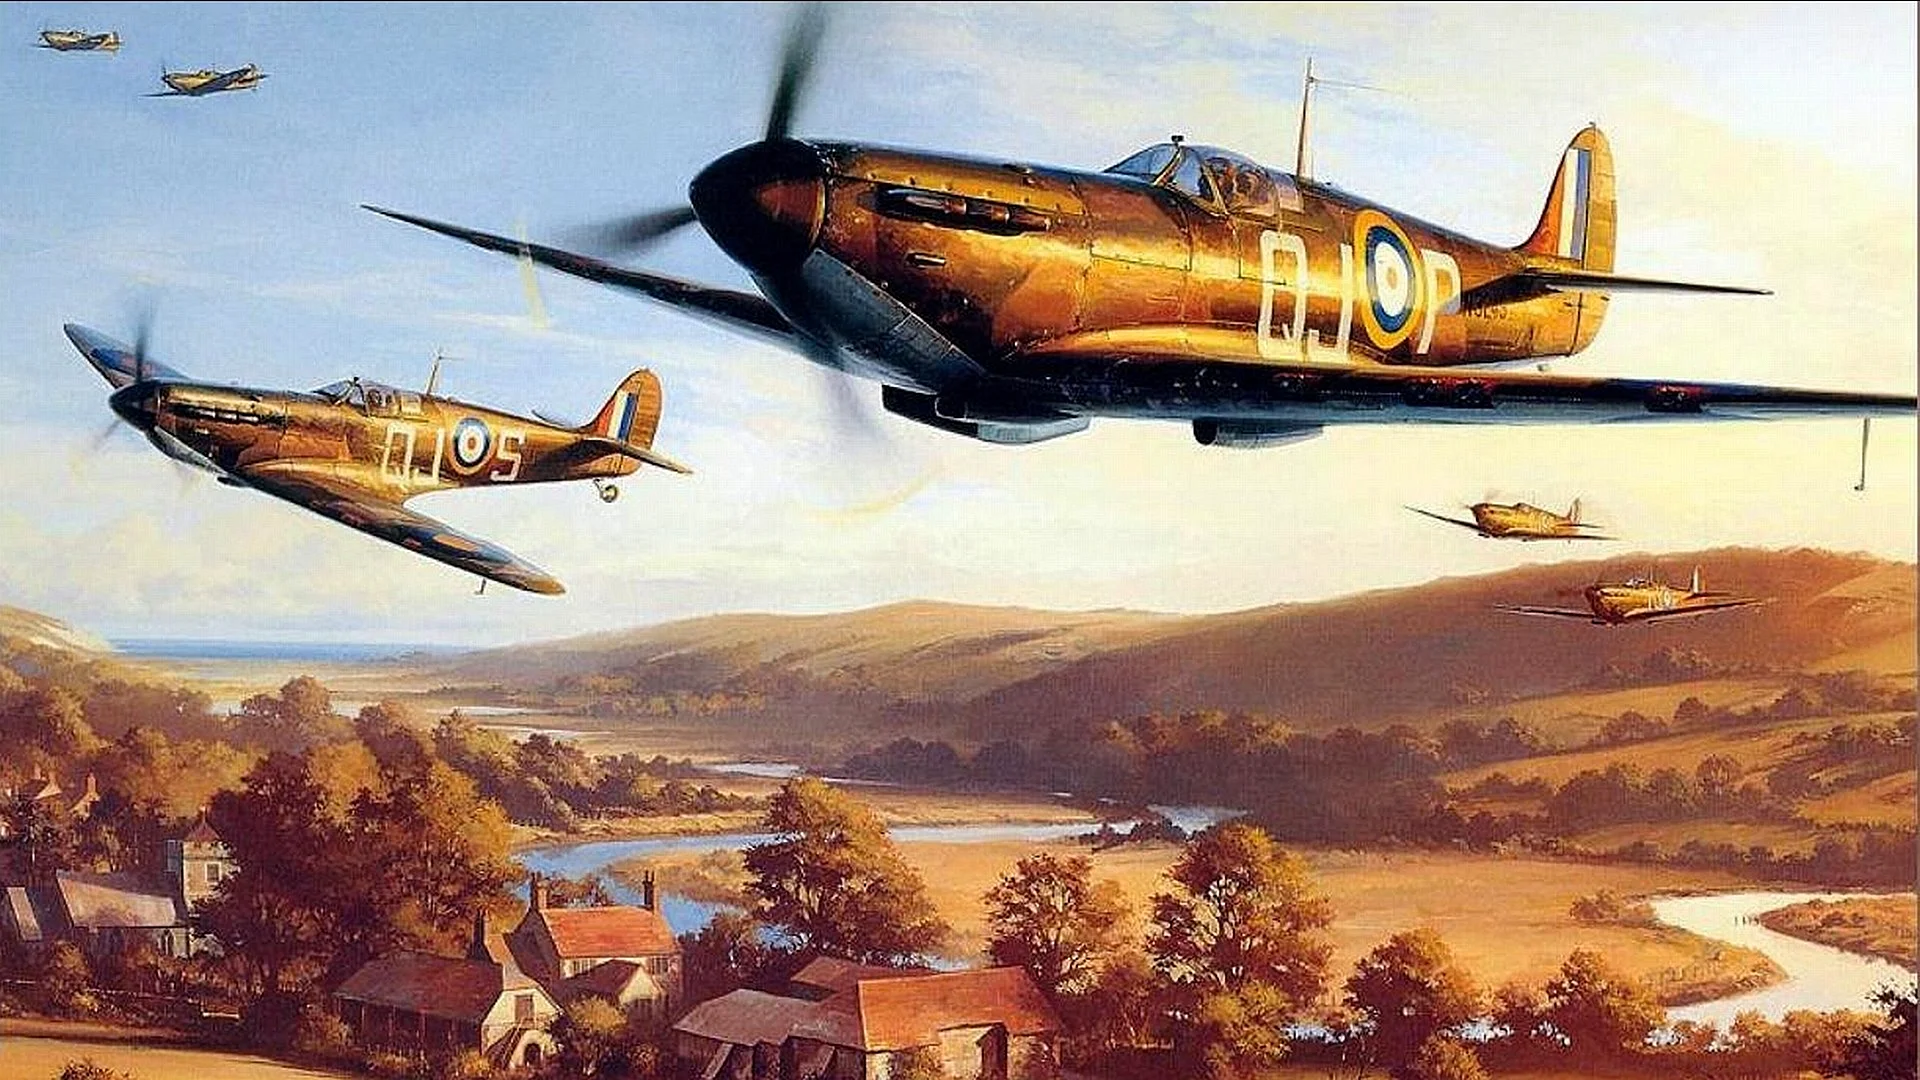 Spitfire Plane Painting Wallpaper